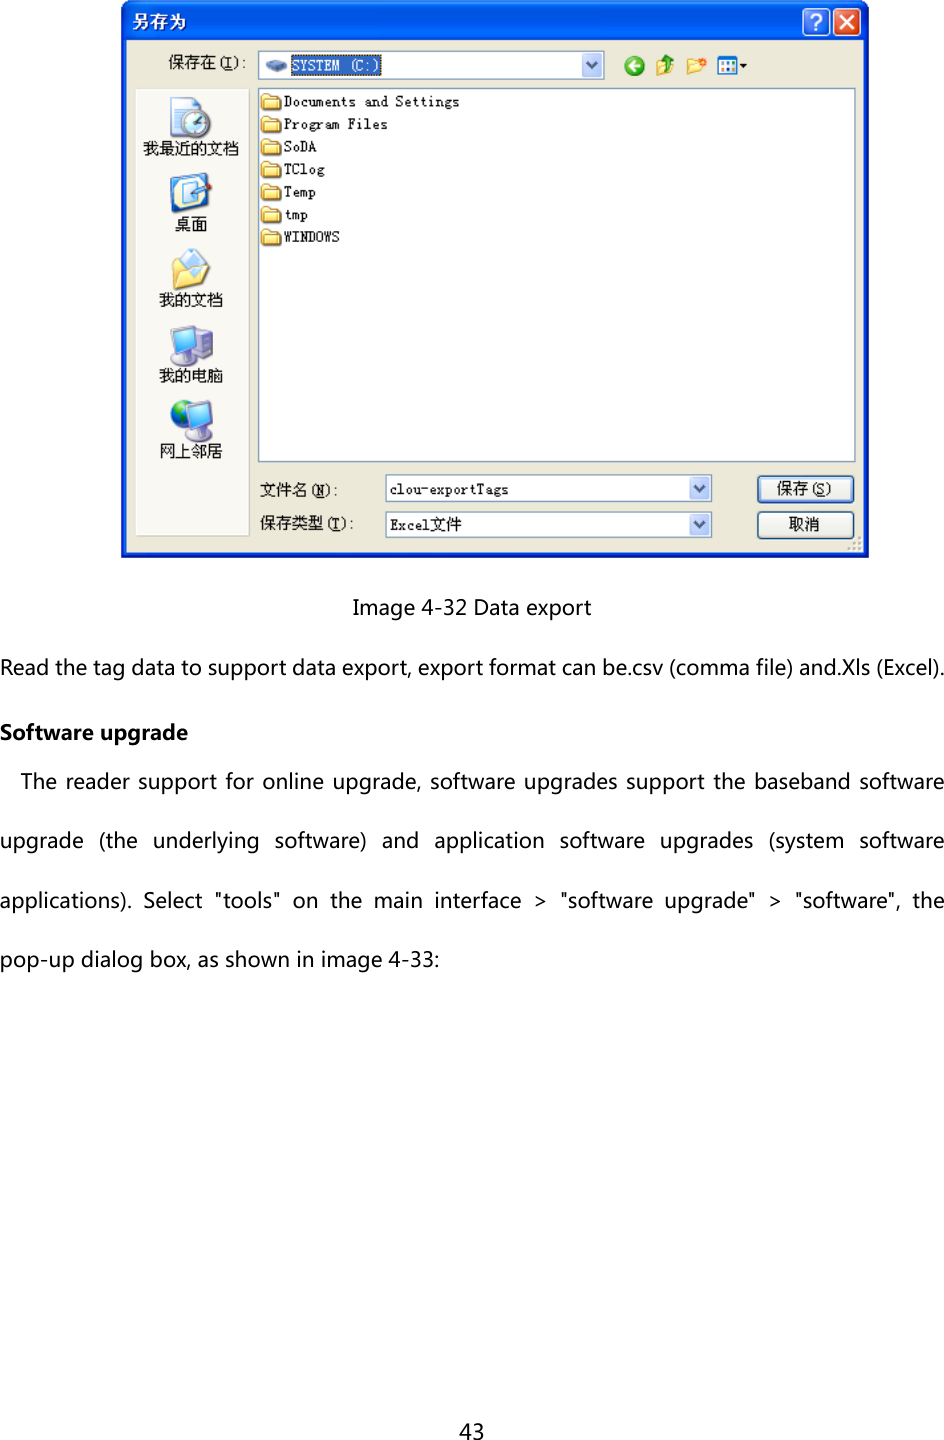  43   Image 4-32 Data export Read the tag data to support data export, export format can be.csv (comma file) and.Xls (Excel). Software upgrade The reader support for online upgrade, software upgrades support the baseband software upgrade  (the  underlying  software)  and  application  software  upgrades  (system  software applications).  Select  &quot;tools&quot;  on  the  main  interface  &gt;  &quot;software upgrade&quot; &gt; &quot;software&quot;, the pop-up dialog box, as shown in image 4-33: 